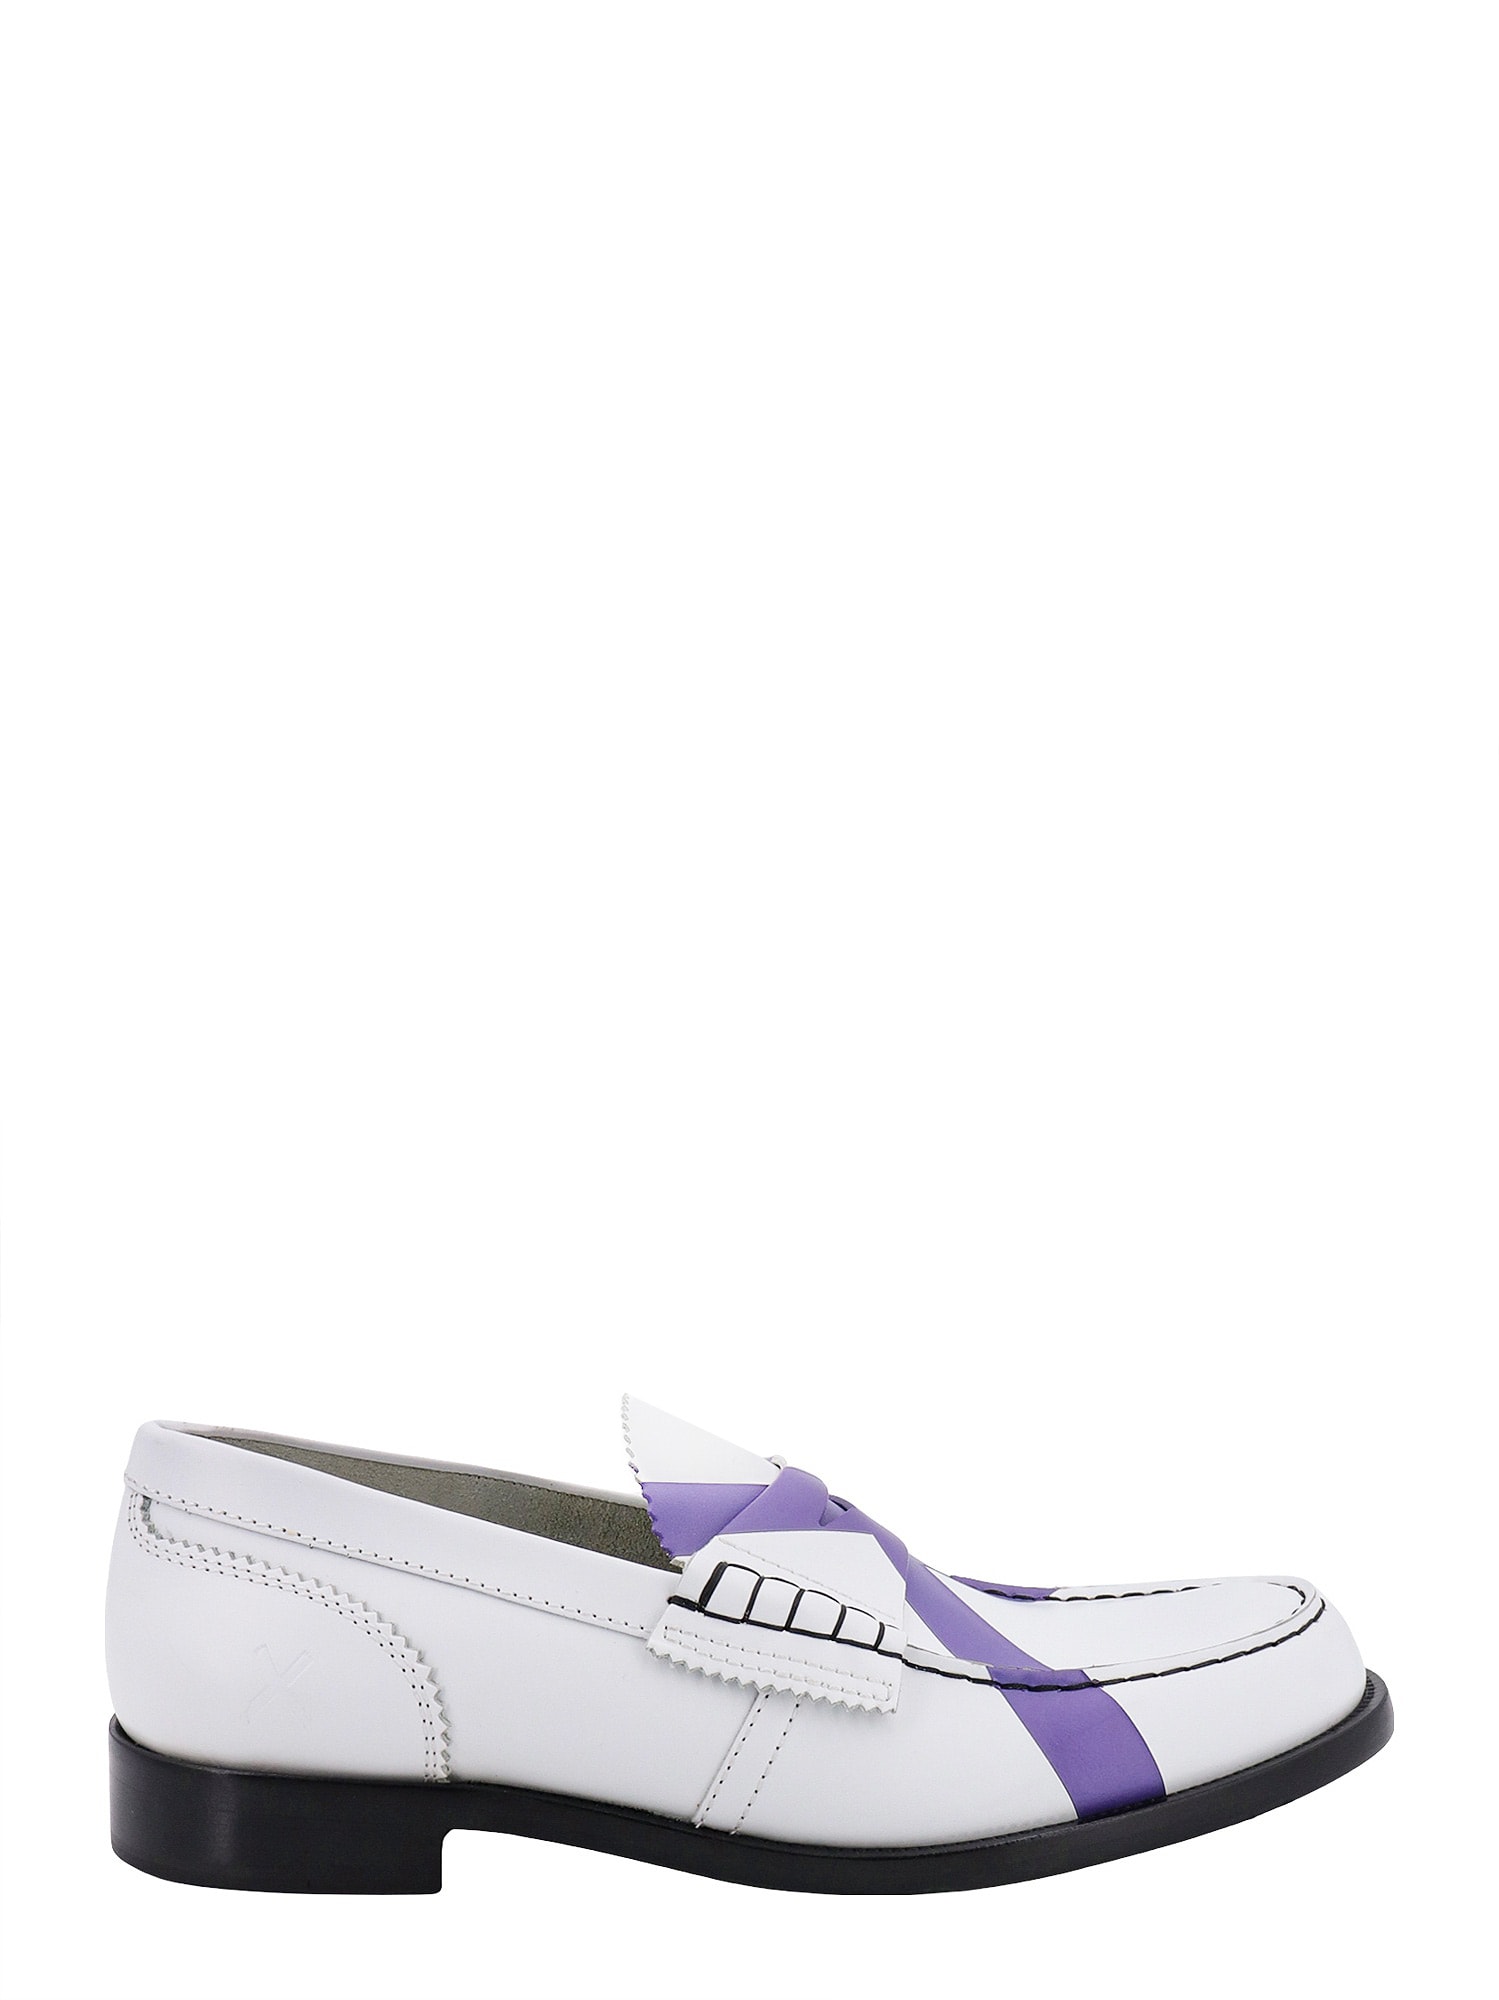 college Loafer